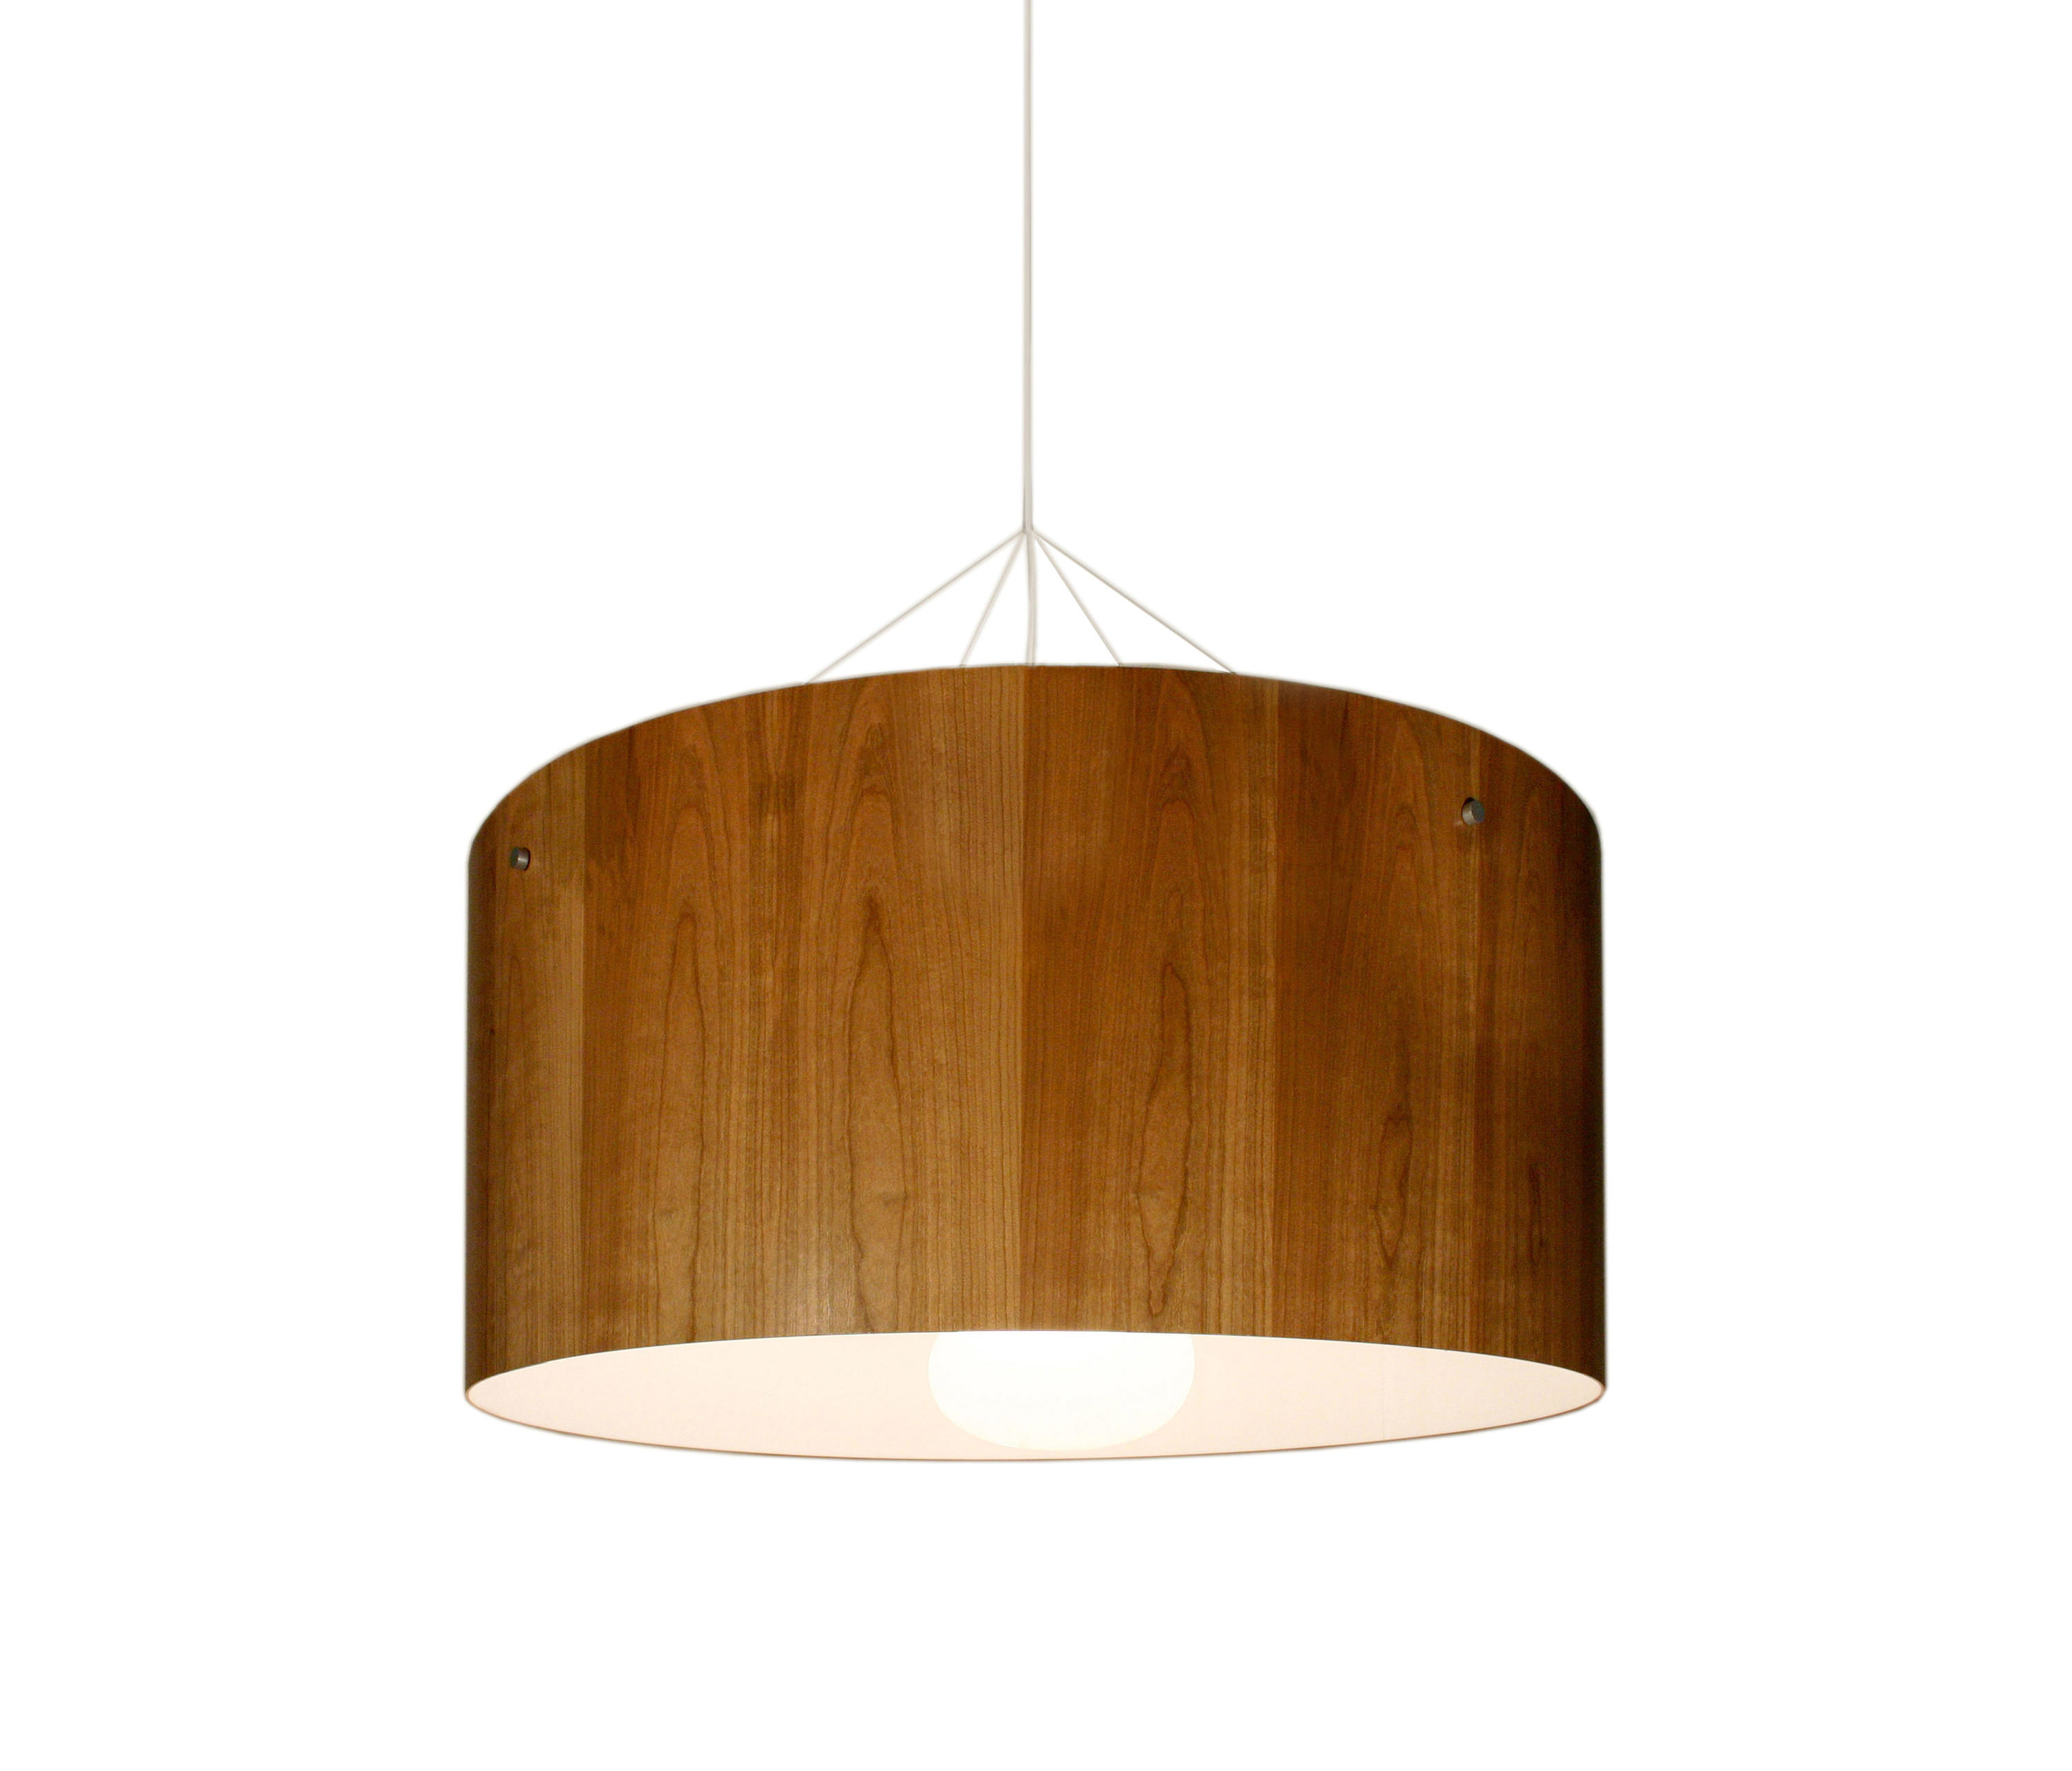 MOTHERLAMP - General lighting from Lampa | Architonic